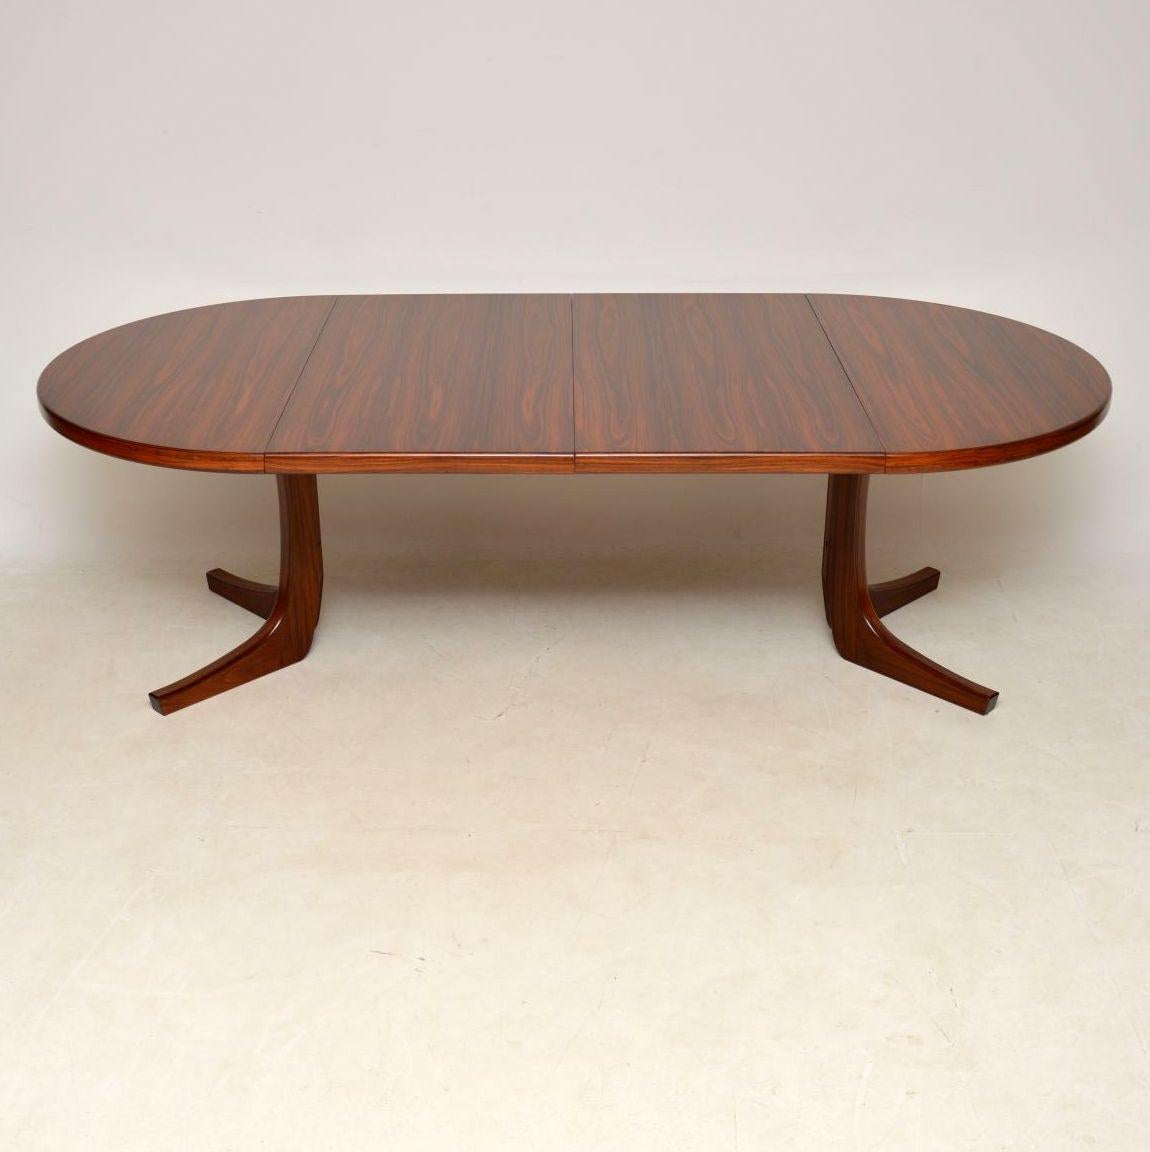 A beautiful and extremely well made vintage extending dining table, this was made in Denmark and dates from the 1960s-1970s. It’s of amazing quality, this has two extra leaves that come with to extend the dining area significantly. The condition is